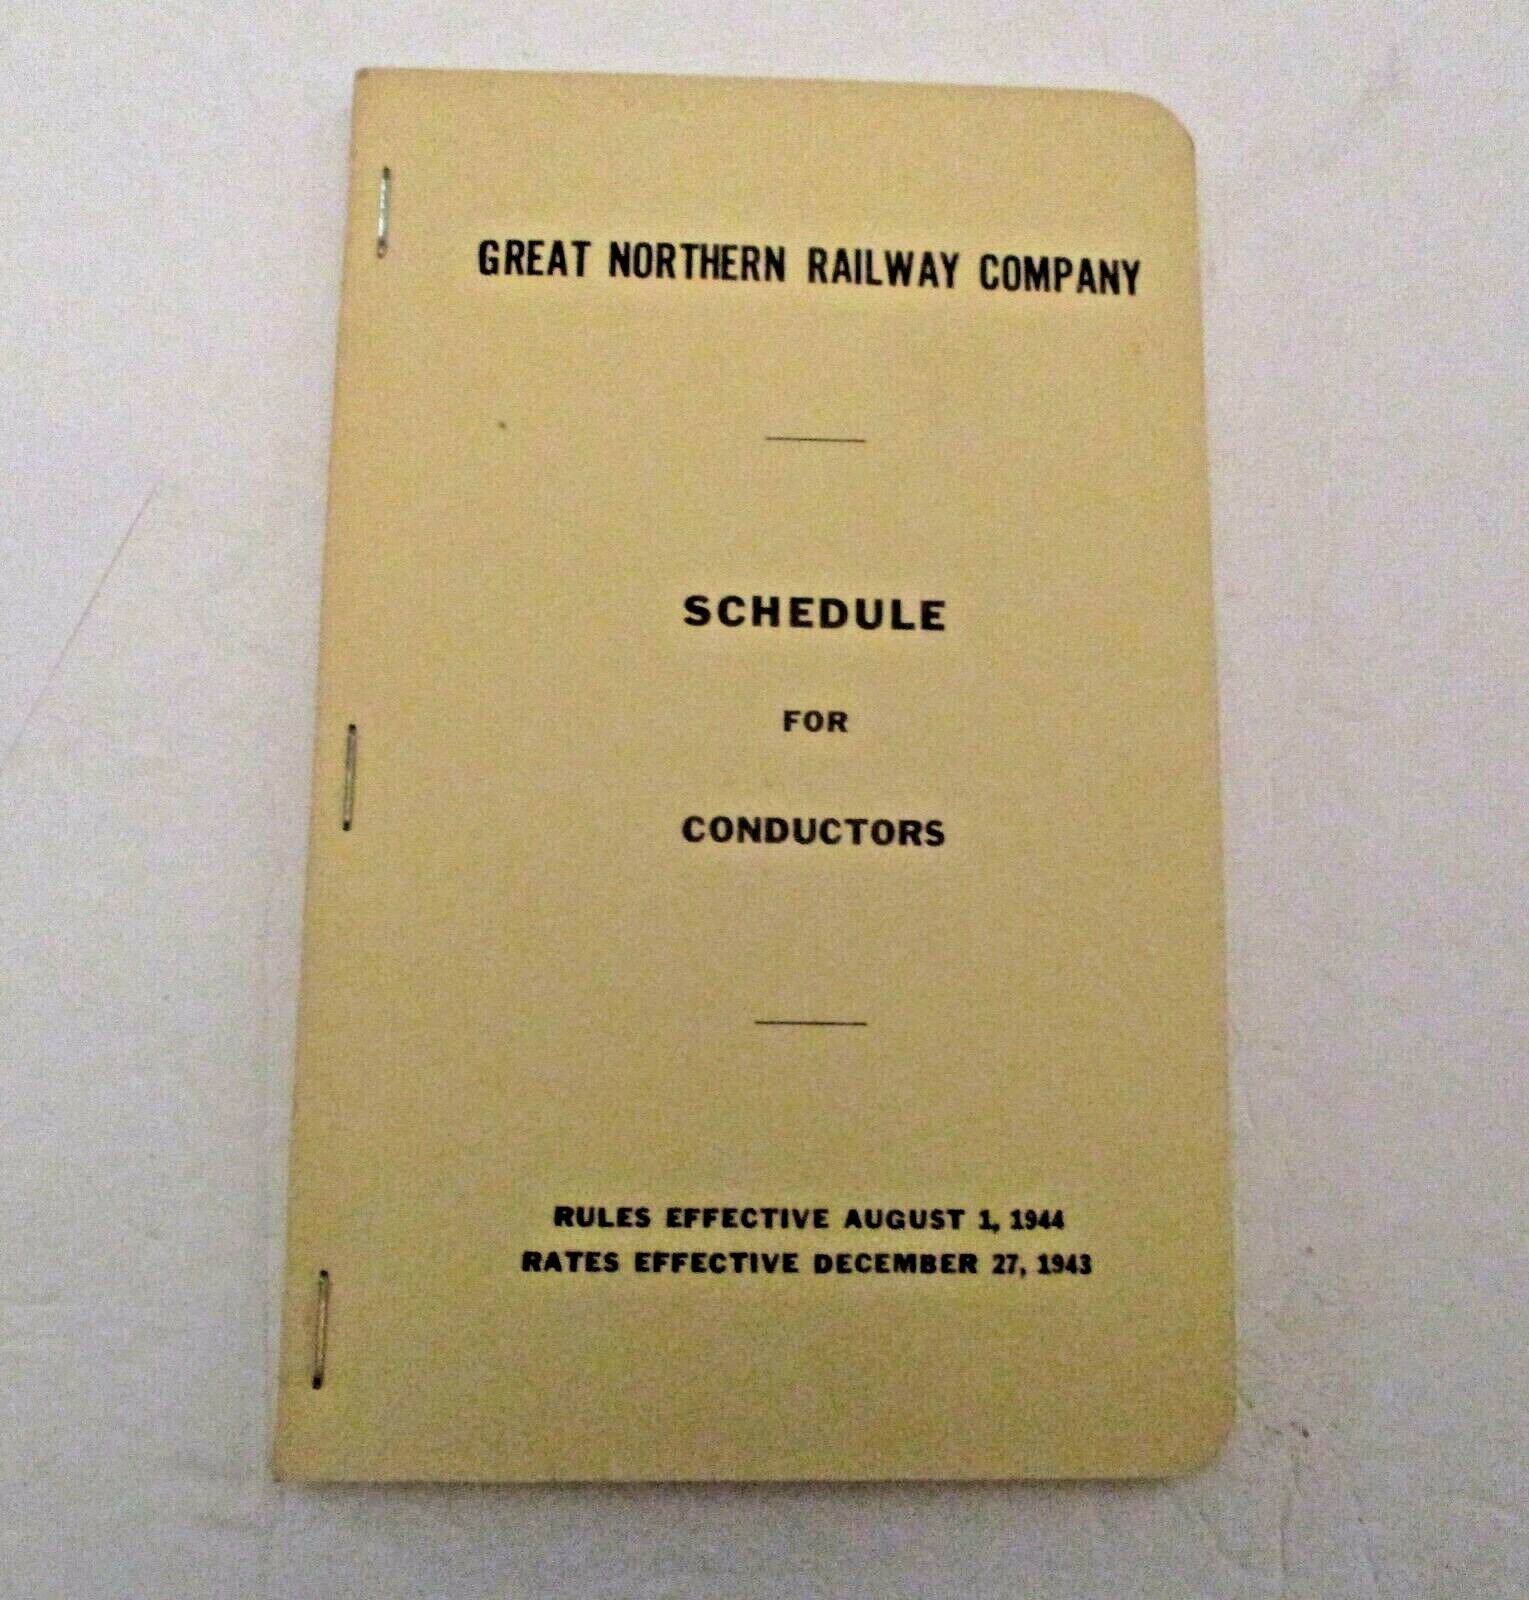 NICE 1943-44 GREAT NORTHERN RAILWAY COMPANY SCHEDULE for CONDUCTORS BOOK MANUAL